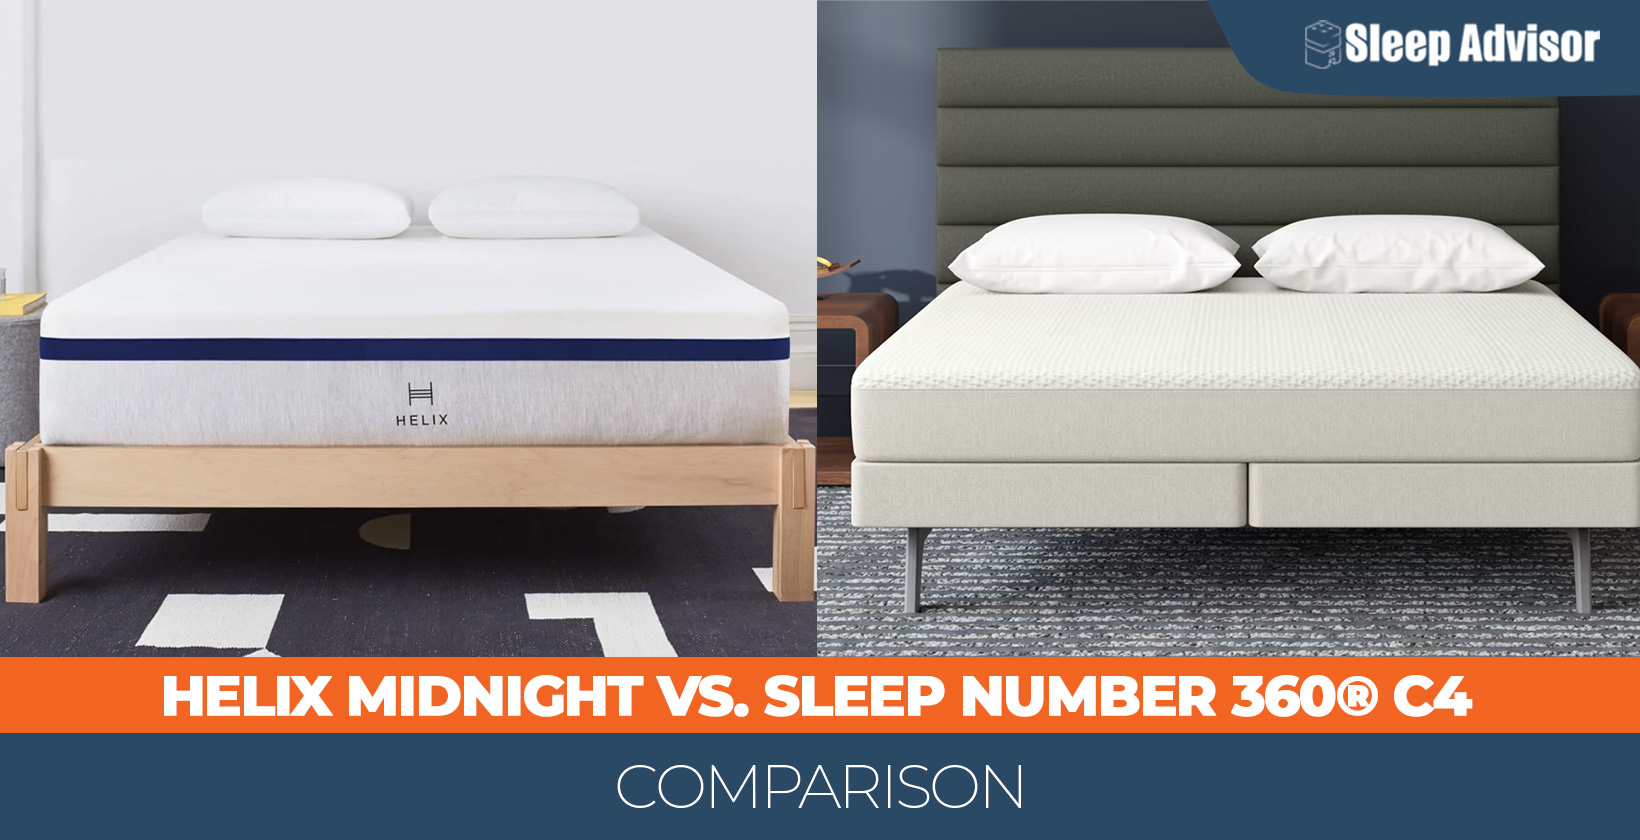 Comparison image for Helix Midnight vs. Sleep Number 360 c4